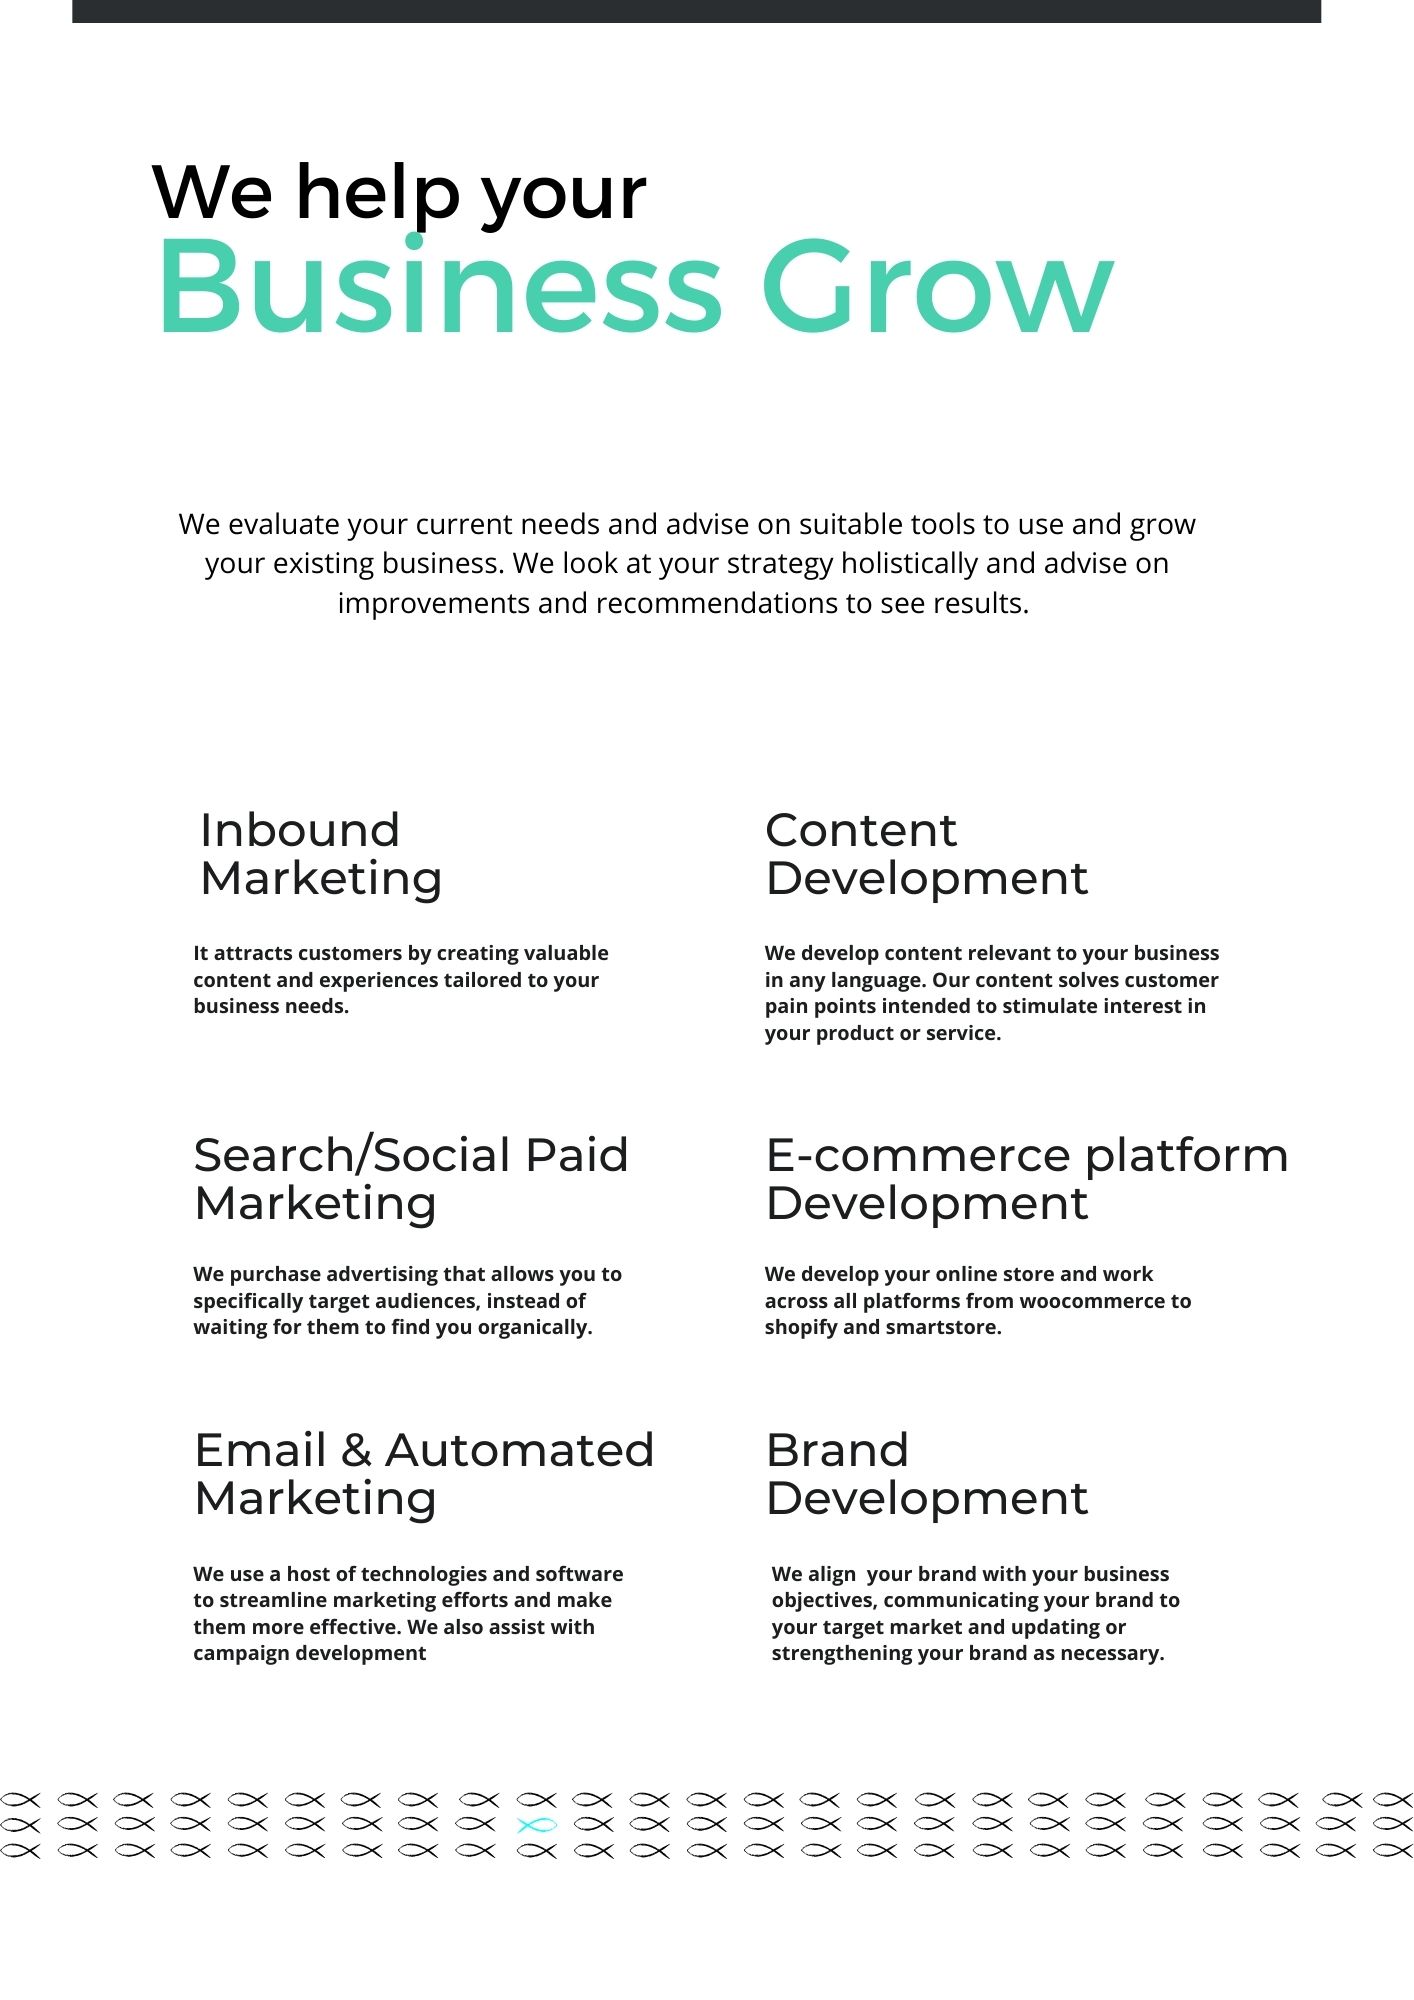 We help you grow your business